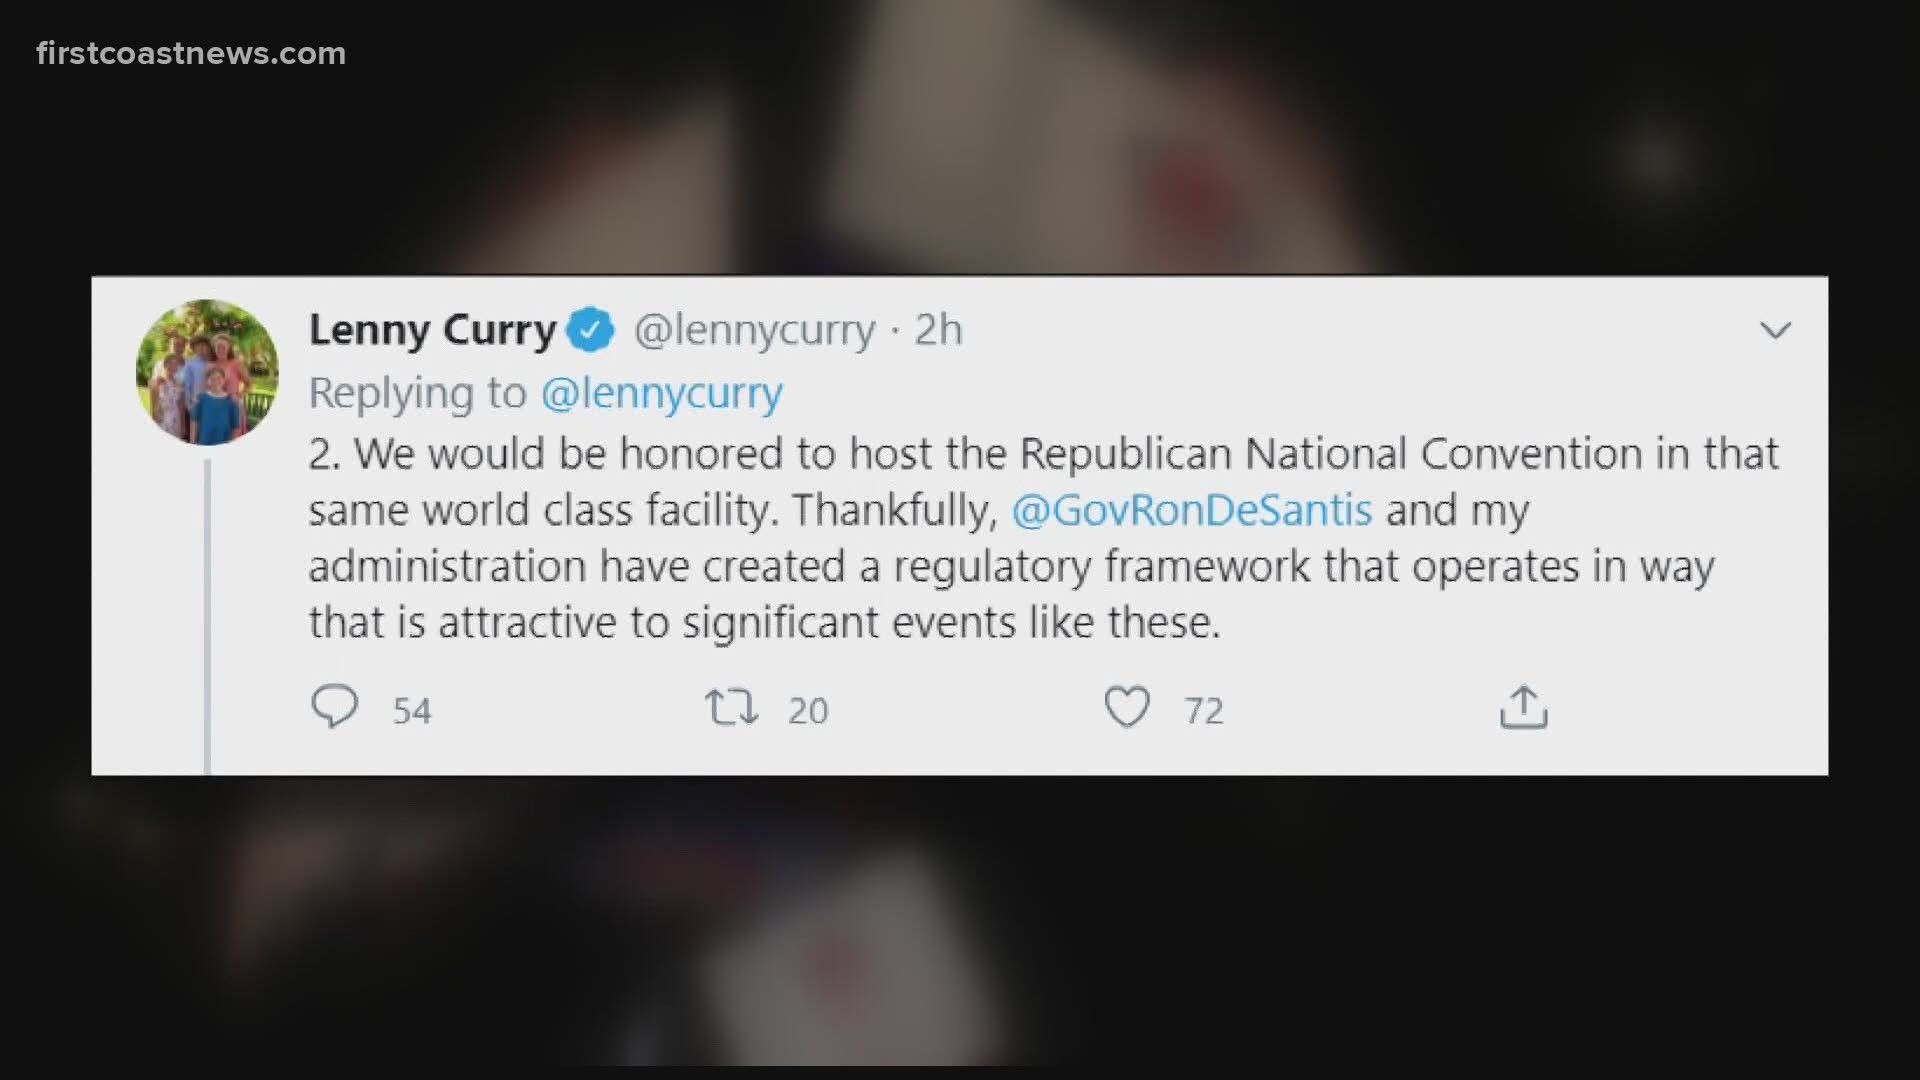 President Trump tweeted he might pull the event from North Carolina if the state will not allow the event to be held at full capacity.